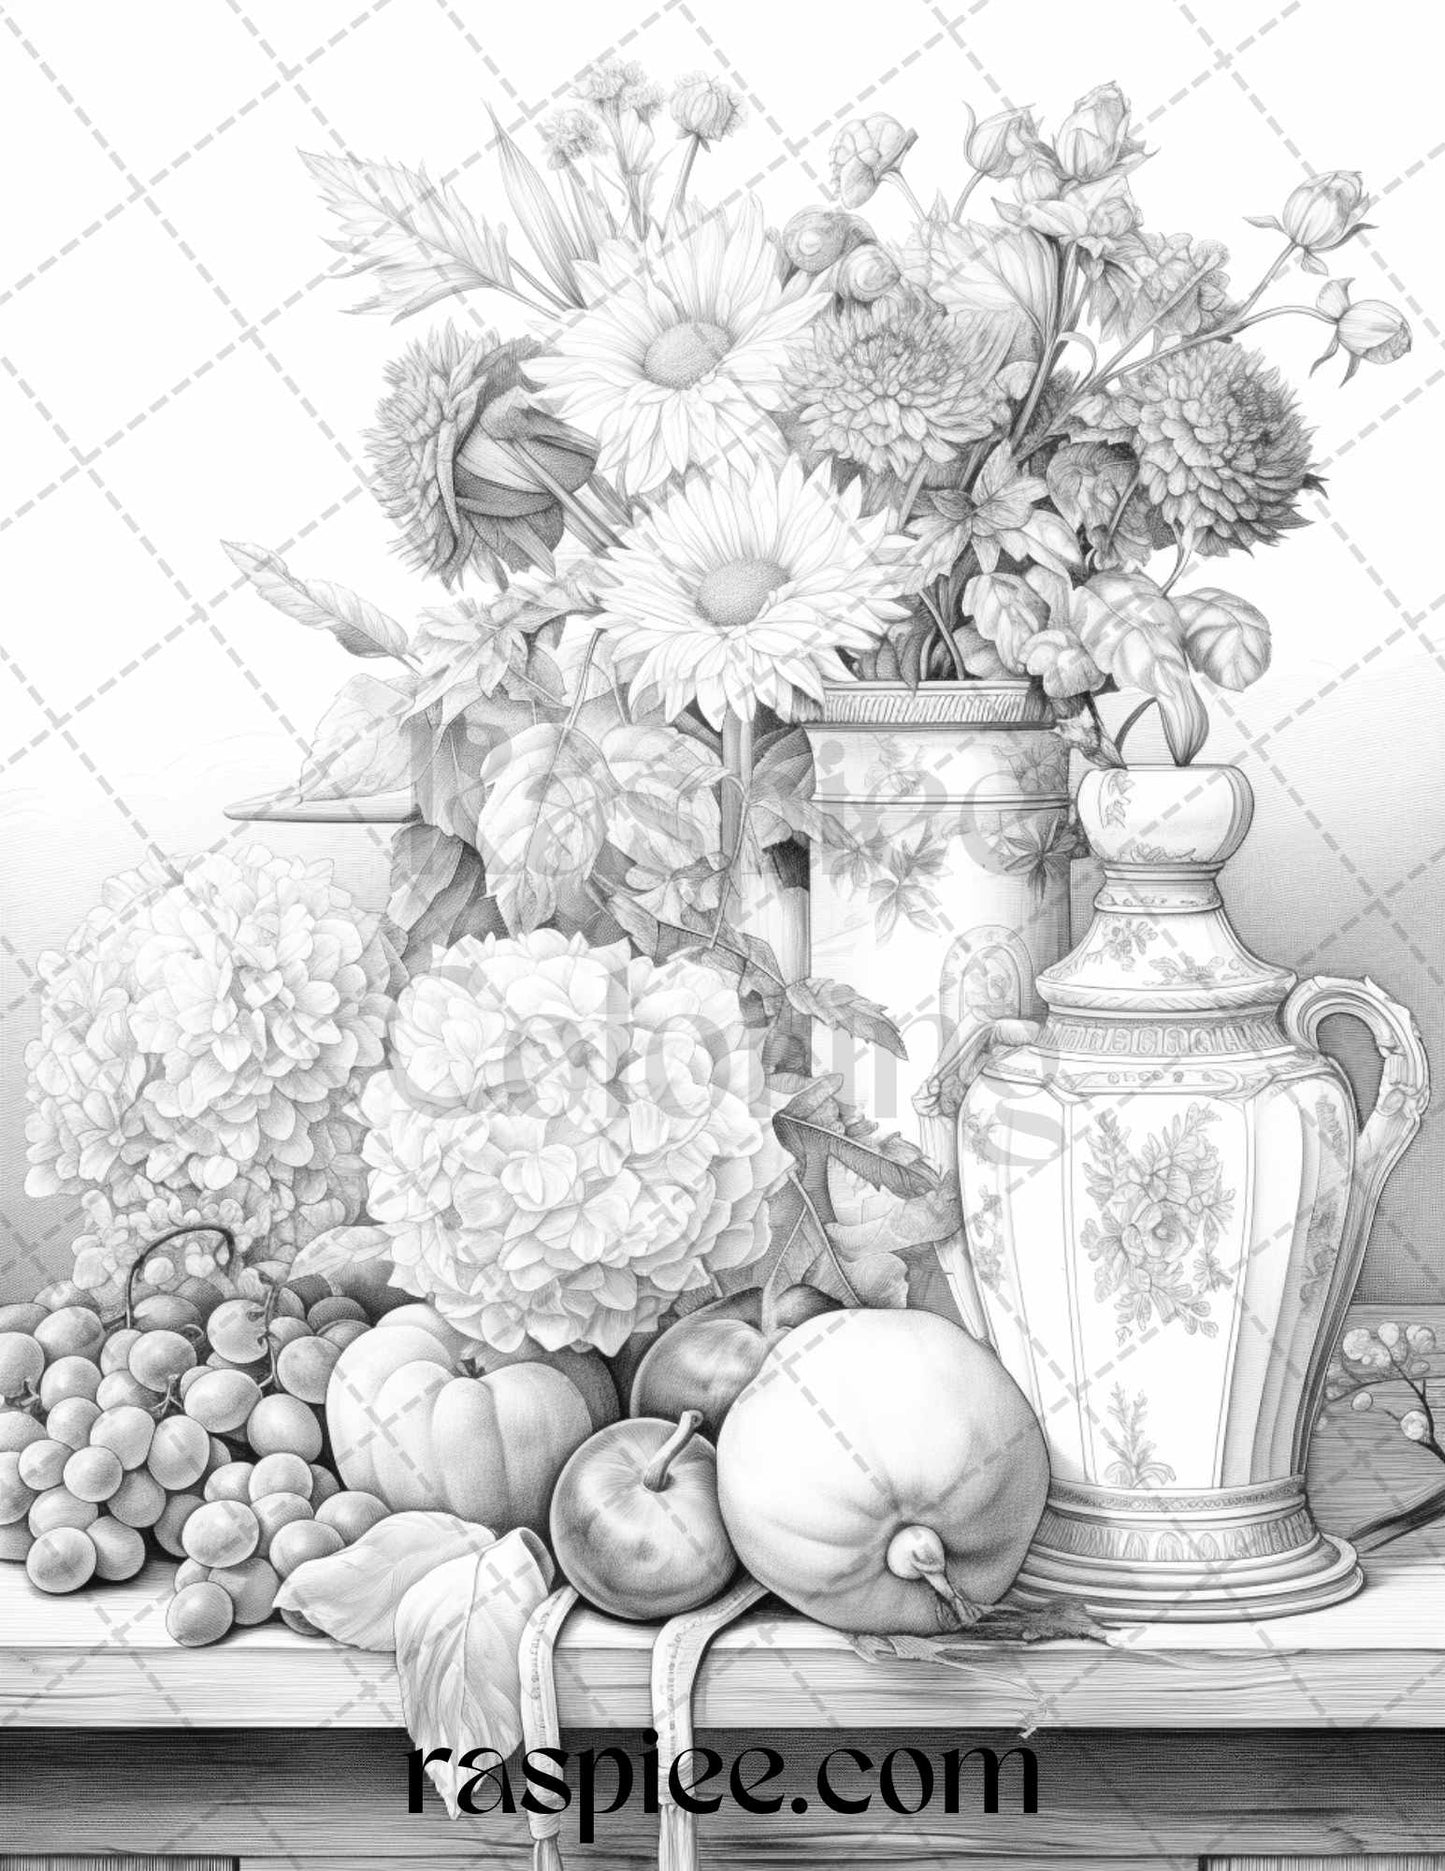 52 Still Life Grayscale Coloring Pages Printable for Adults, PDF File Instant Download - raspiee